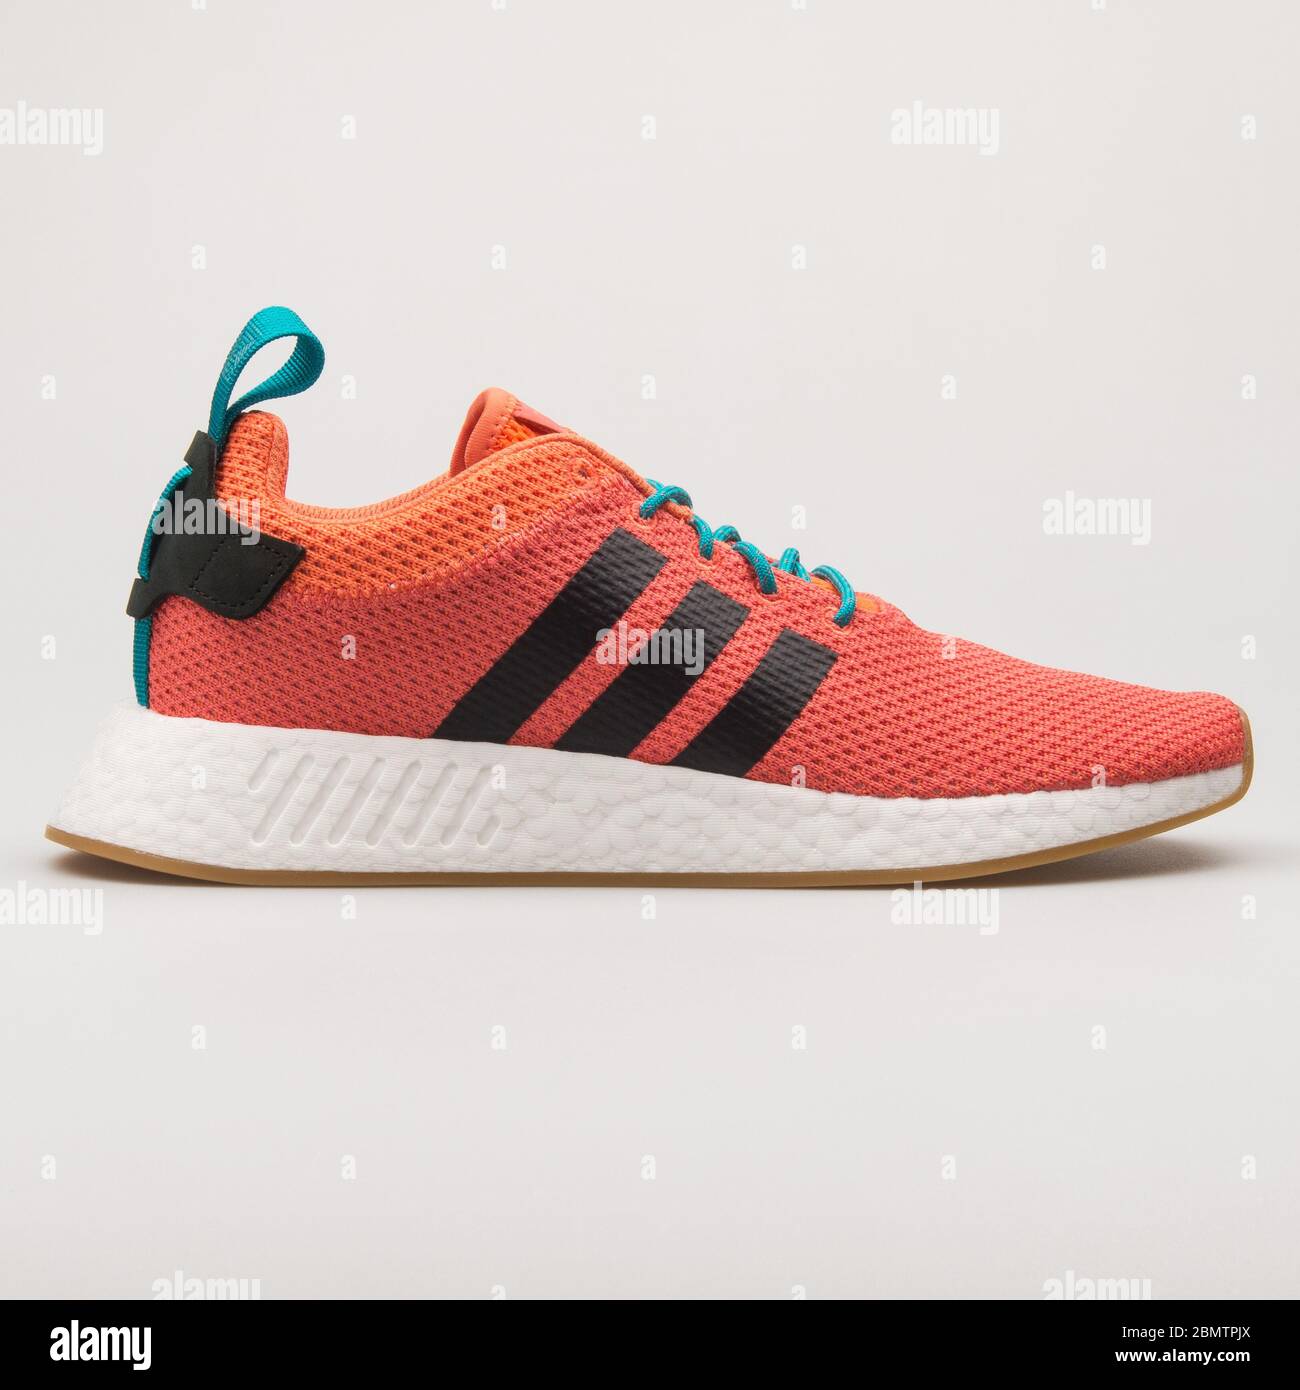 VIENNA, AUSTRIA - FEBRUARY 19, 2018: Adidas NMD R2 Summer coral sneaker on  white background Stock Photo - Alamy